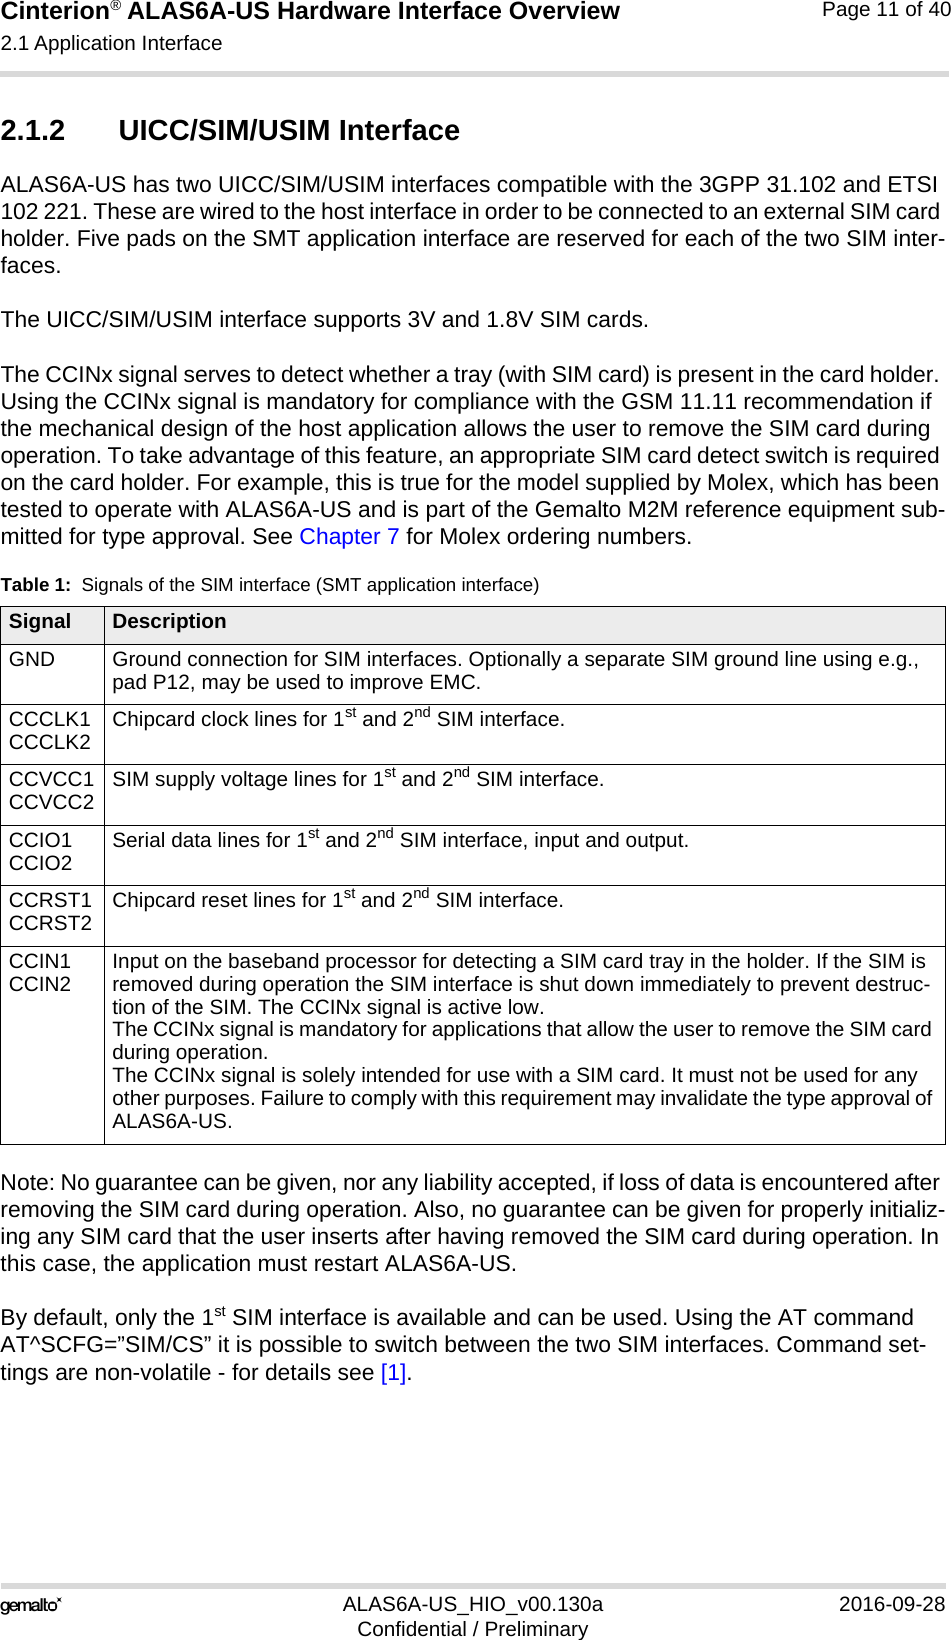 Cinterion® ALAS6A-US Hardware Interface Overview2.1 Application Interface22ALAS6A-US_HIO_v00.130a 2016-09-28Confidential / PreliminaryPage 11 of 402.1.2 UICC/SIM/USIM InterfaceALAS6A-US has two UICC/SIM/USIM interfaces compatible with the 3GPP 31.102 and ETSI 102 221. These are wired to the host interface in order to be connected to an external SIM card holder. Five pads on the SMT application interface are reserved for each of the two SIM inter-faces.The UICC/SIM/USIM interface supports 3V and 1.8V SIM cards. The CCINx signal serves to detect whether a tray (with SIM card) is present in the card holder. Using the CCINx signal is mandatory for compliance with the GSM 11.11 recommendation if the mechanical design of the host application allows the user to remove the SIM card during operation. To take advantage of this feature, an appropriate SIM card detect switch is required on the card holder. For example, this is true for the model supplied by Molex, which has been tested to operate with ALAS6A-US and is part of the Gemalto M2M reference equipment sub-mitted for type approval. See Chapter 7 for Molex ordering numbers.Note: No guarantee can be given, nor any liability accepted, if loss of data is encountered after removing the SIM card during operation. Also, no guarantee can be given for properly initializ-ing any SIM card that the user inserts after having removed the SIM card during operation. In this case, the application must restart ALAS6A-US.By default, only the 1st SIM interface is available and can be used. Using the AT command AT^SCFG=”SIM/CS” it is possible to switch between the two SIM interfaces. Command set-tings are non-volatile - for details see [1].Table 1:  Signals of the SIM interface (SMT application interface)Signal DescriptionGND Ground connection for SIM interfaces. Optionally a separate SIM ground line using e.g., pad P12, may be used to improve EMC.CCCLK1CCCLK2 Chipcard clock lines for 1st and 2nd SIM interface.CCVCC1CCVCC2 SIM supply voltage lines for 1st and 2nd SIM interface.CCIO1CCIO2 Serial data lines for 1st and 2nd SIM interface, input and output.CCRST1CCRST2 Chipcard reset lines for 1st and 2nd SIM interface.CCIN1CCIN2 Input on the baseband processor for detecting a SIM card tray in the holder. If the SIM is removed during operation the SIM interface is shut down immediately to prevent destruc-tion of the SIM. The CCINx signal is active low.The CCINx signal is mandatory for applications that allow the user to remove the SIM card during operation. The CCINx signal is solely intended for use with a SIM card. It must not be used for any other purposes. Failure to comply with this requirement may invalidate the type approval of ALAS6A-US.